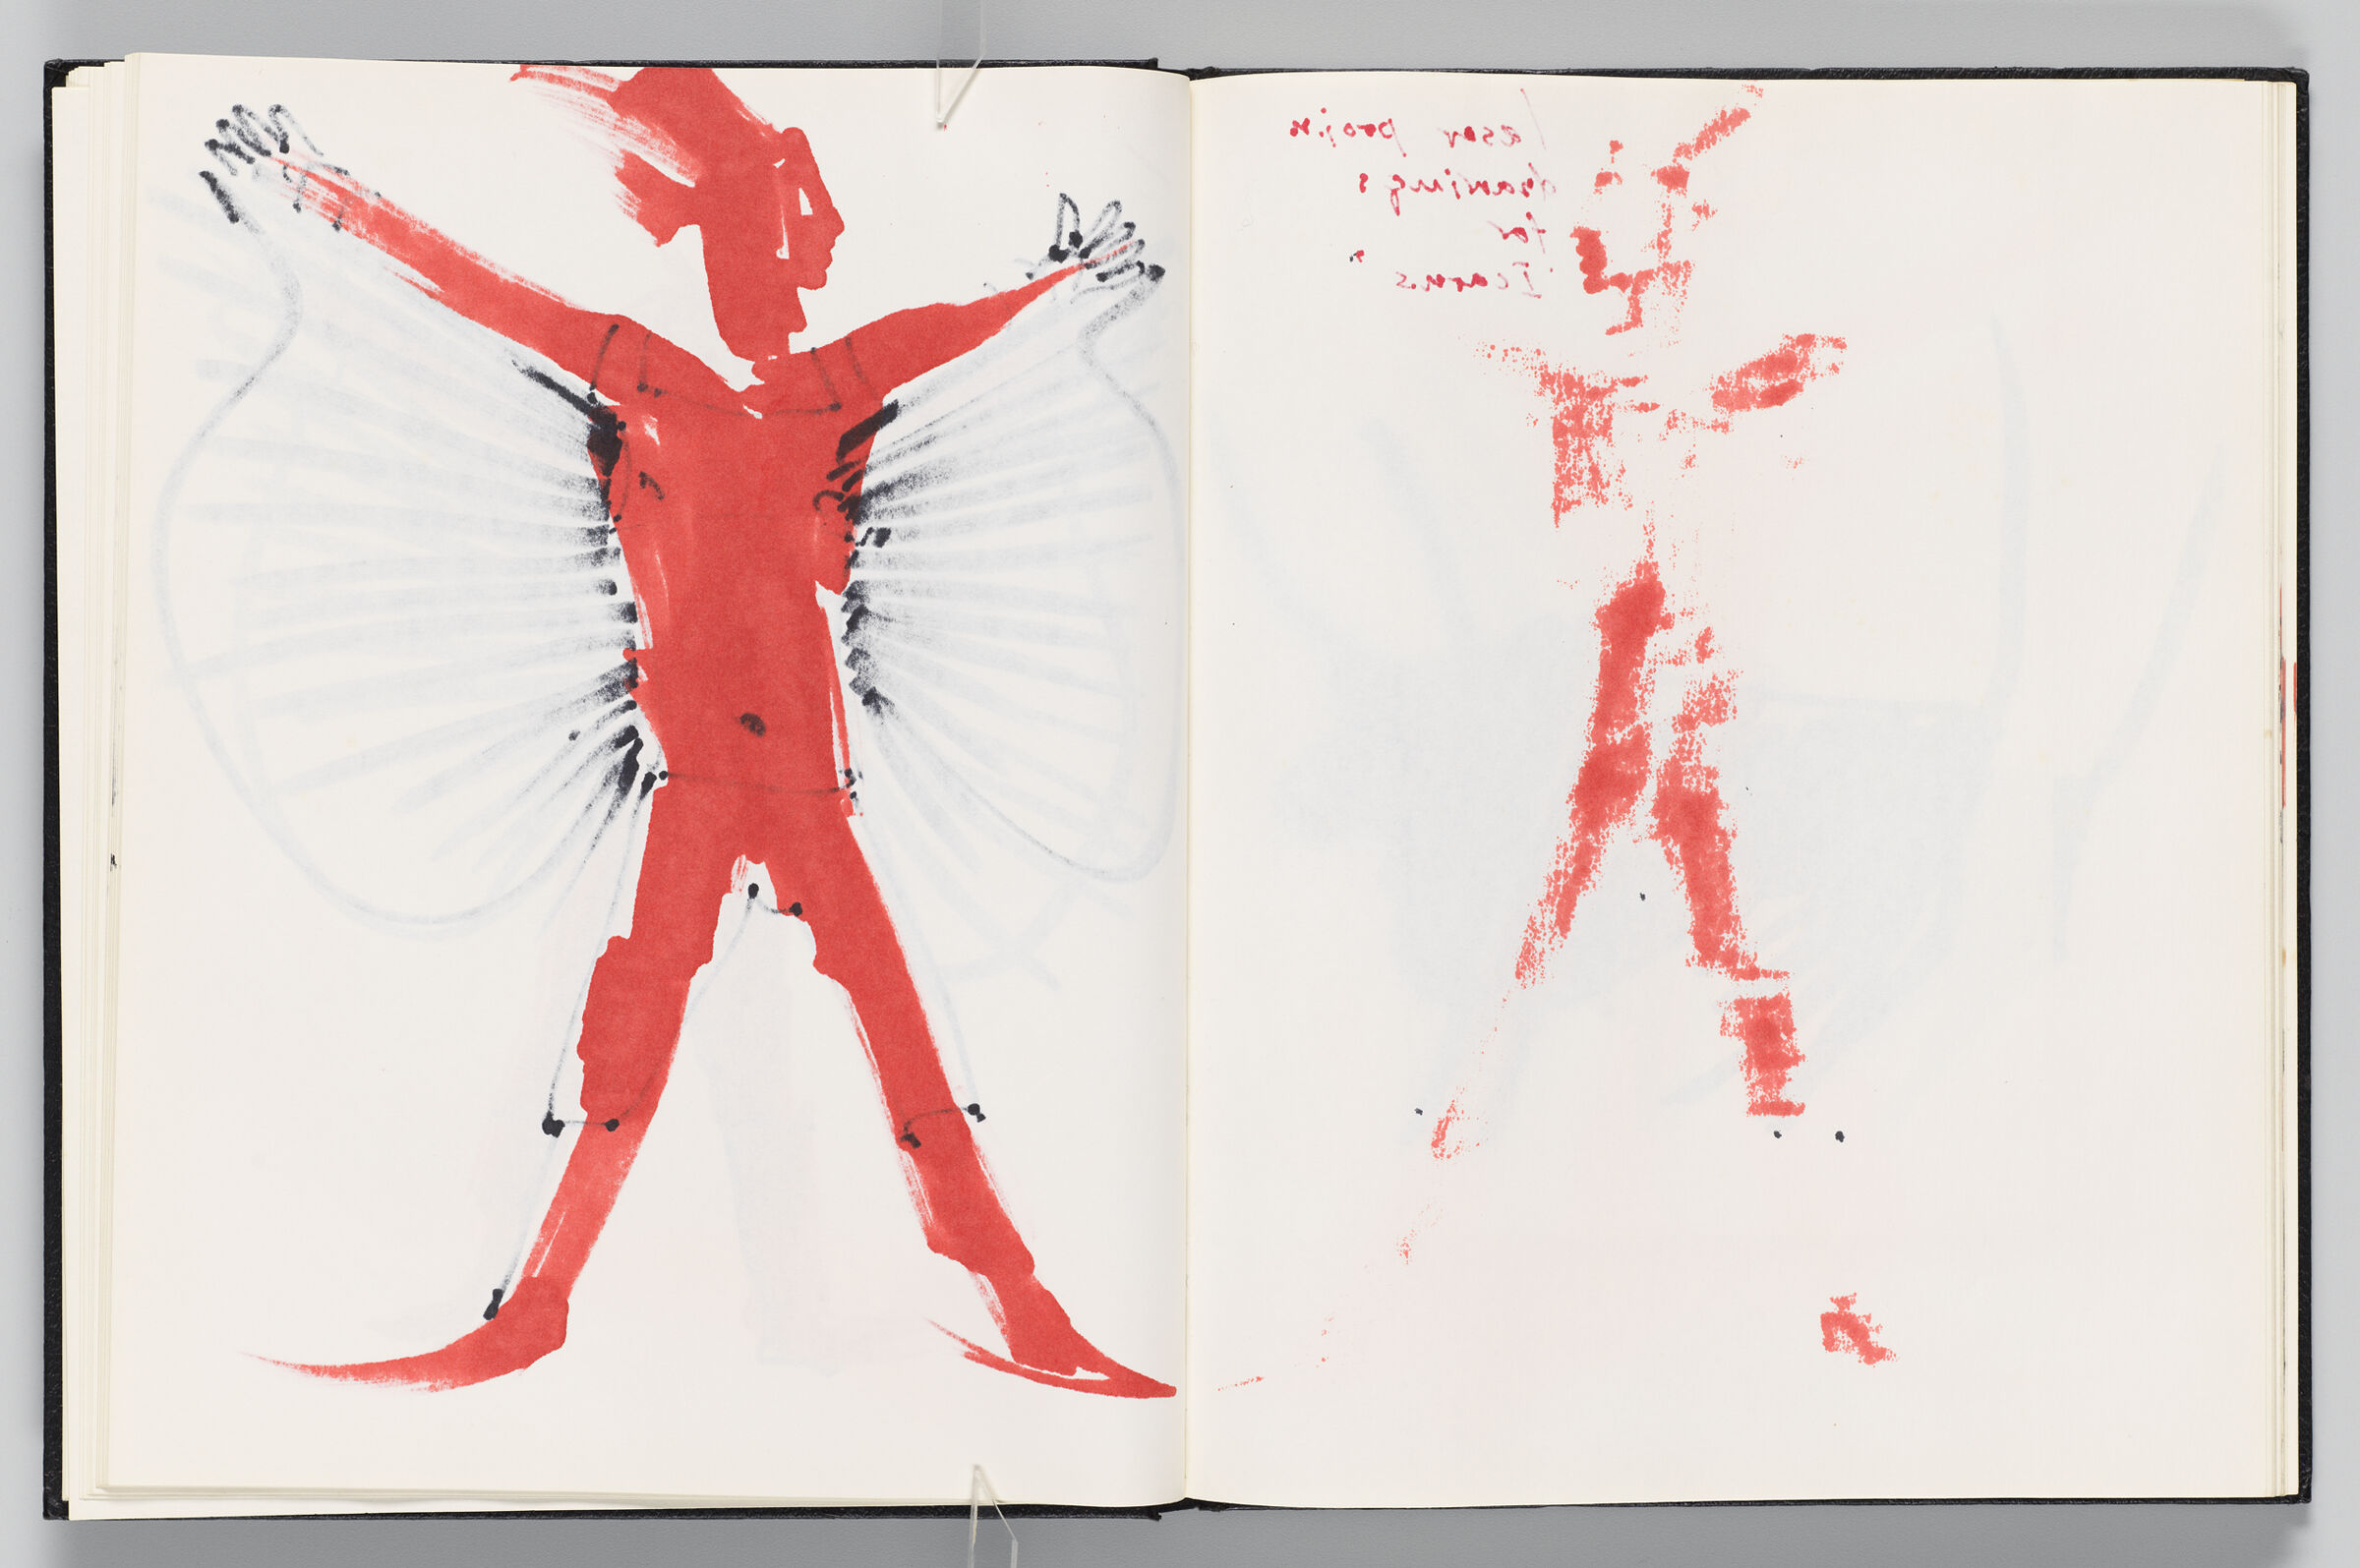 Untitled (Bleed-Through Of Previous Page, Left Page); Untitled (Color Transfer And Bleed-Through Of Following Page, Right Page)